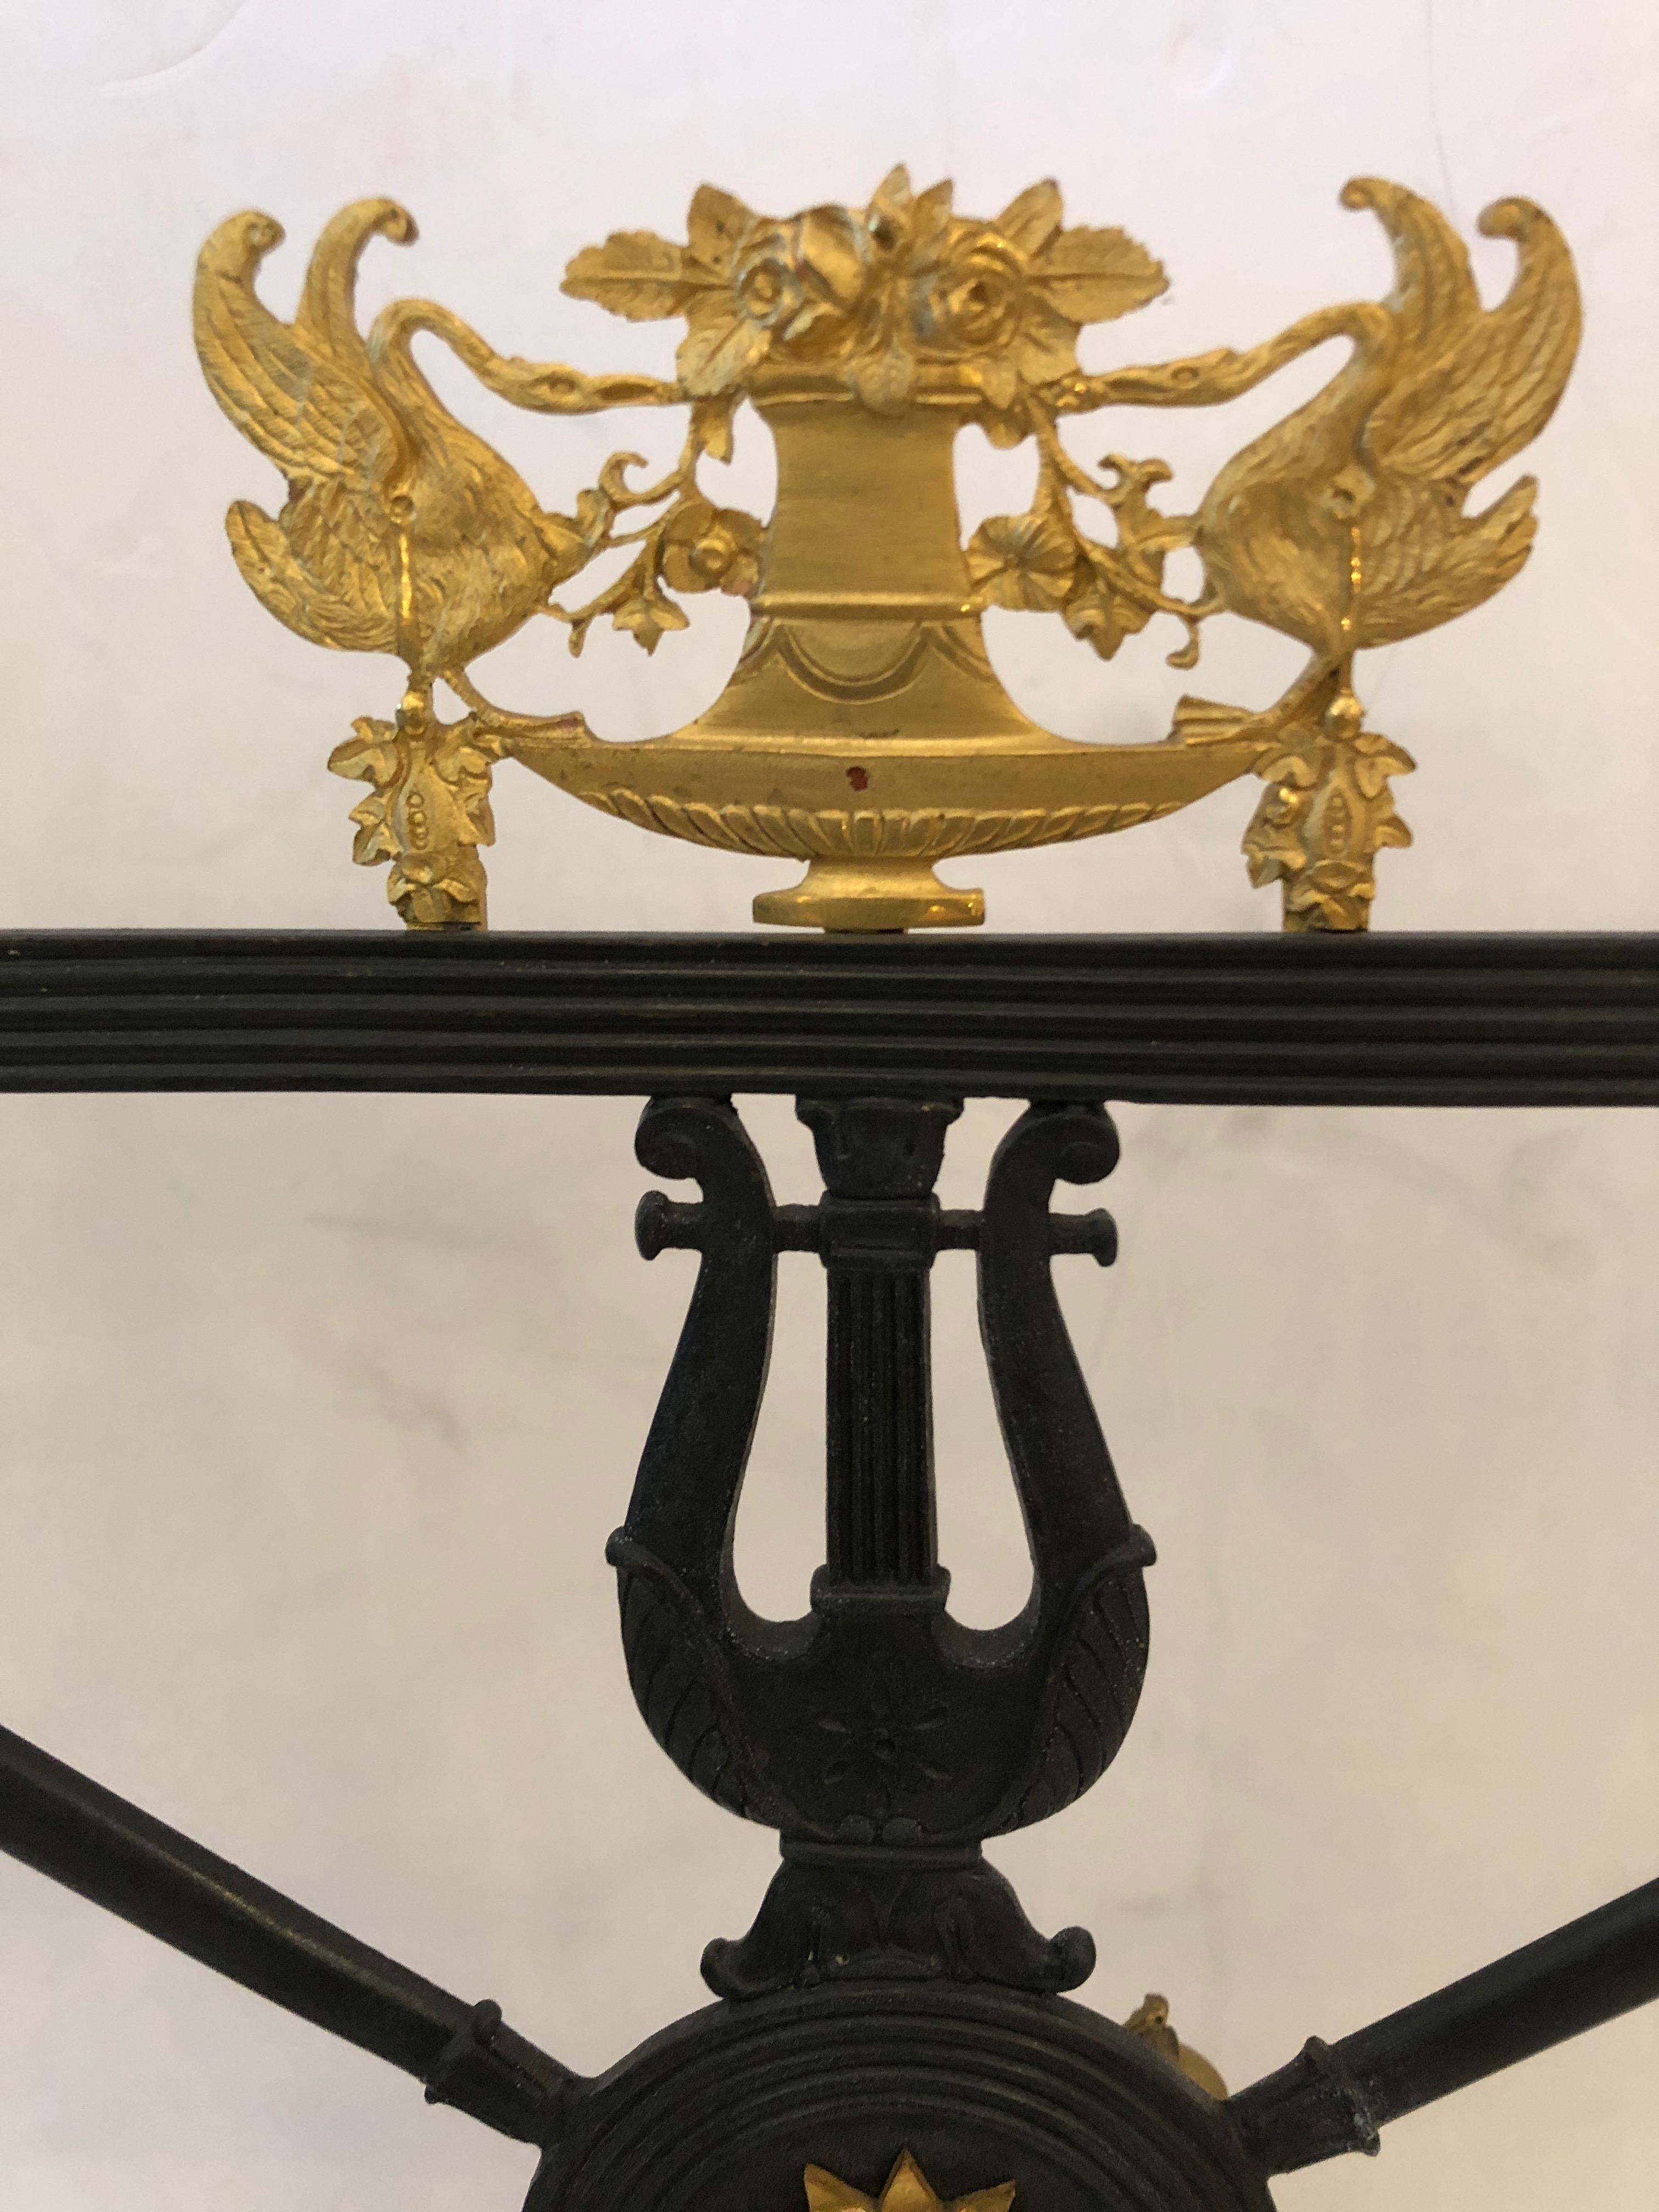 A breathtaking bronze doré neoclassical bookstand that's a true work of art, having contrasting dark bronze and gold embellishments including lyres, swans, a classical sunburst face, scrolls and acanthus leaves, with fluted column resting on a